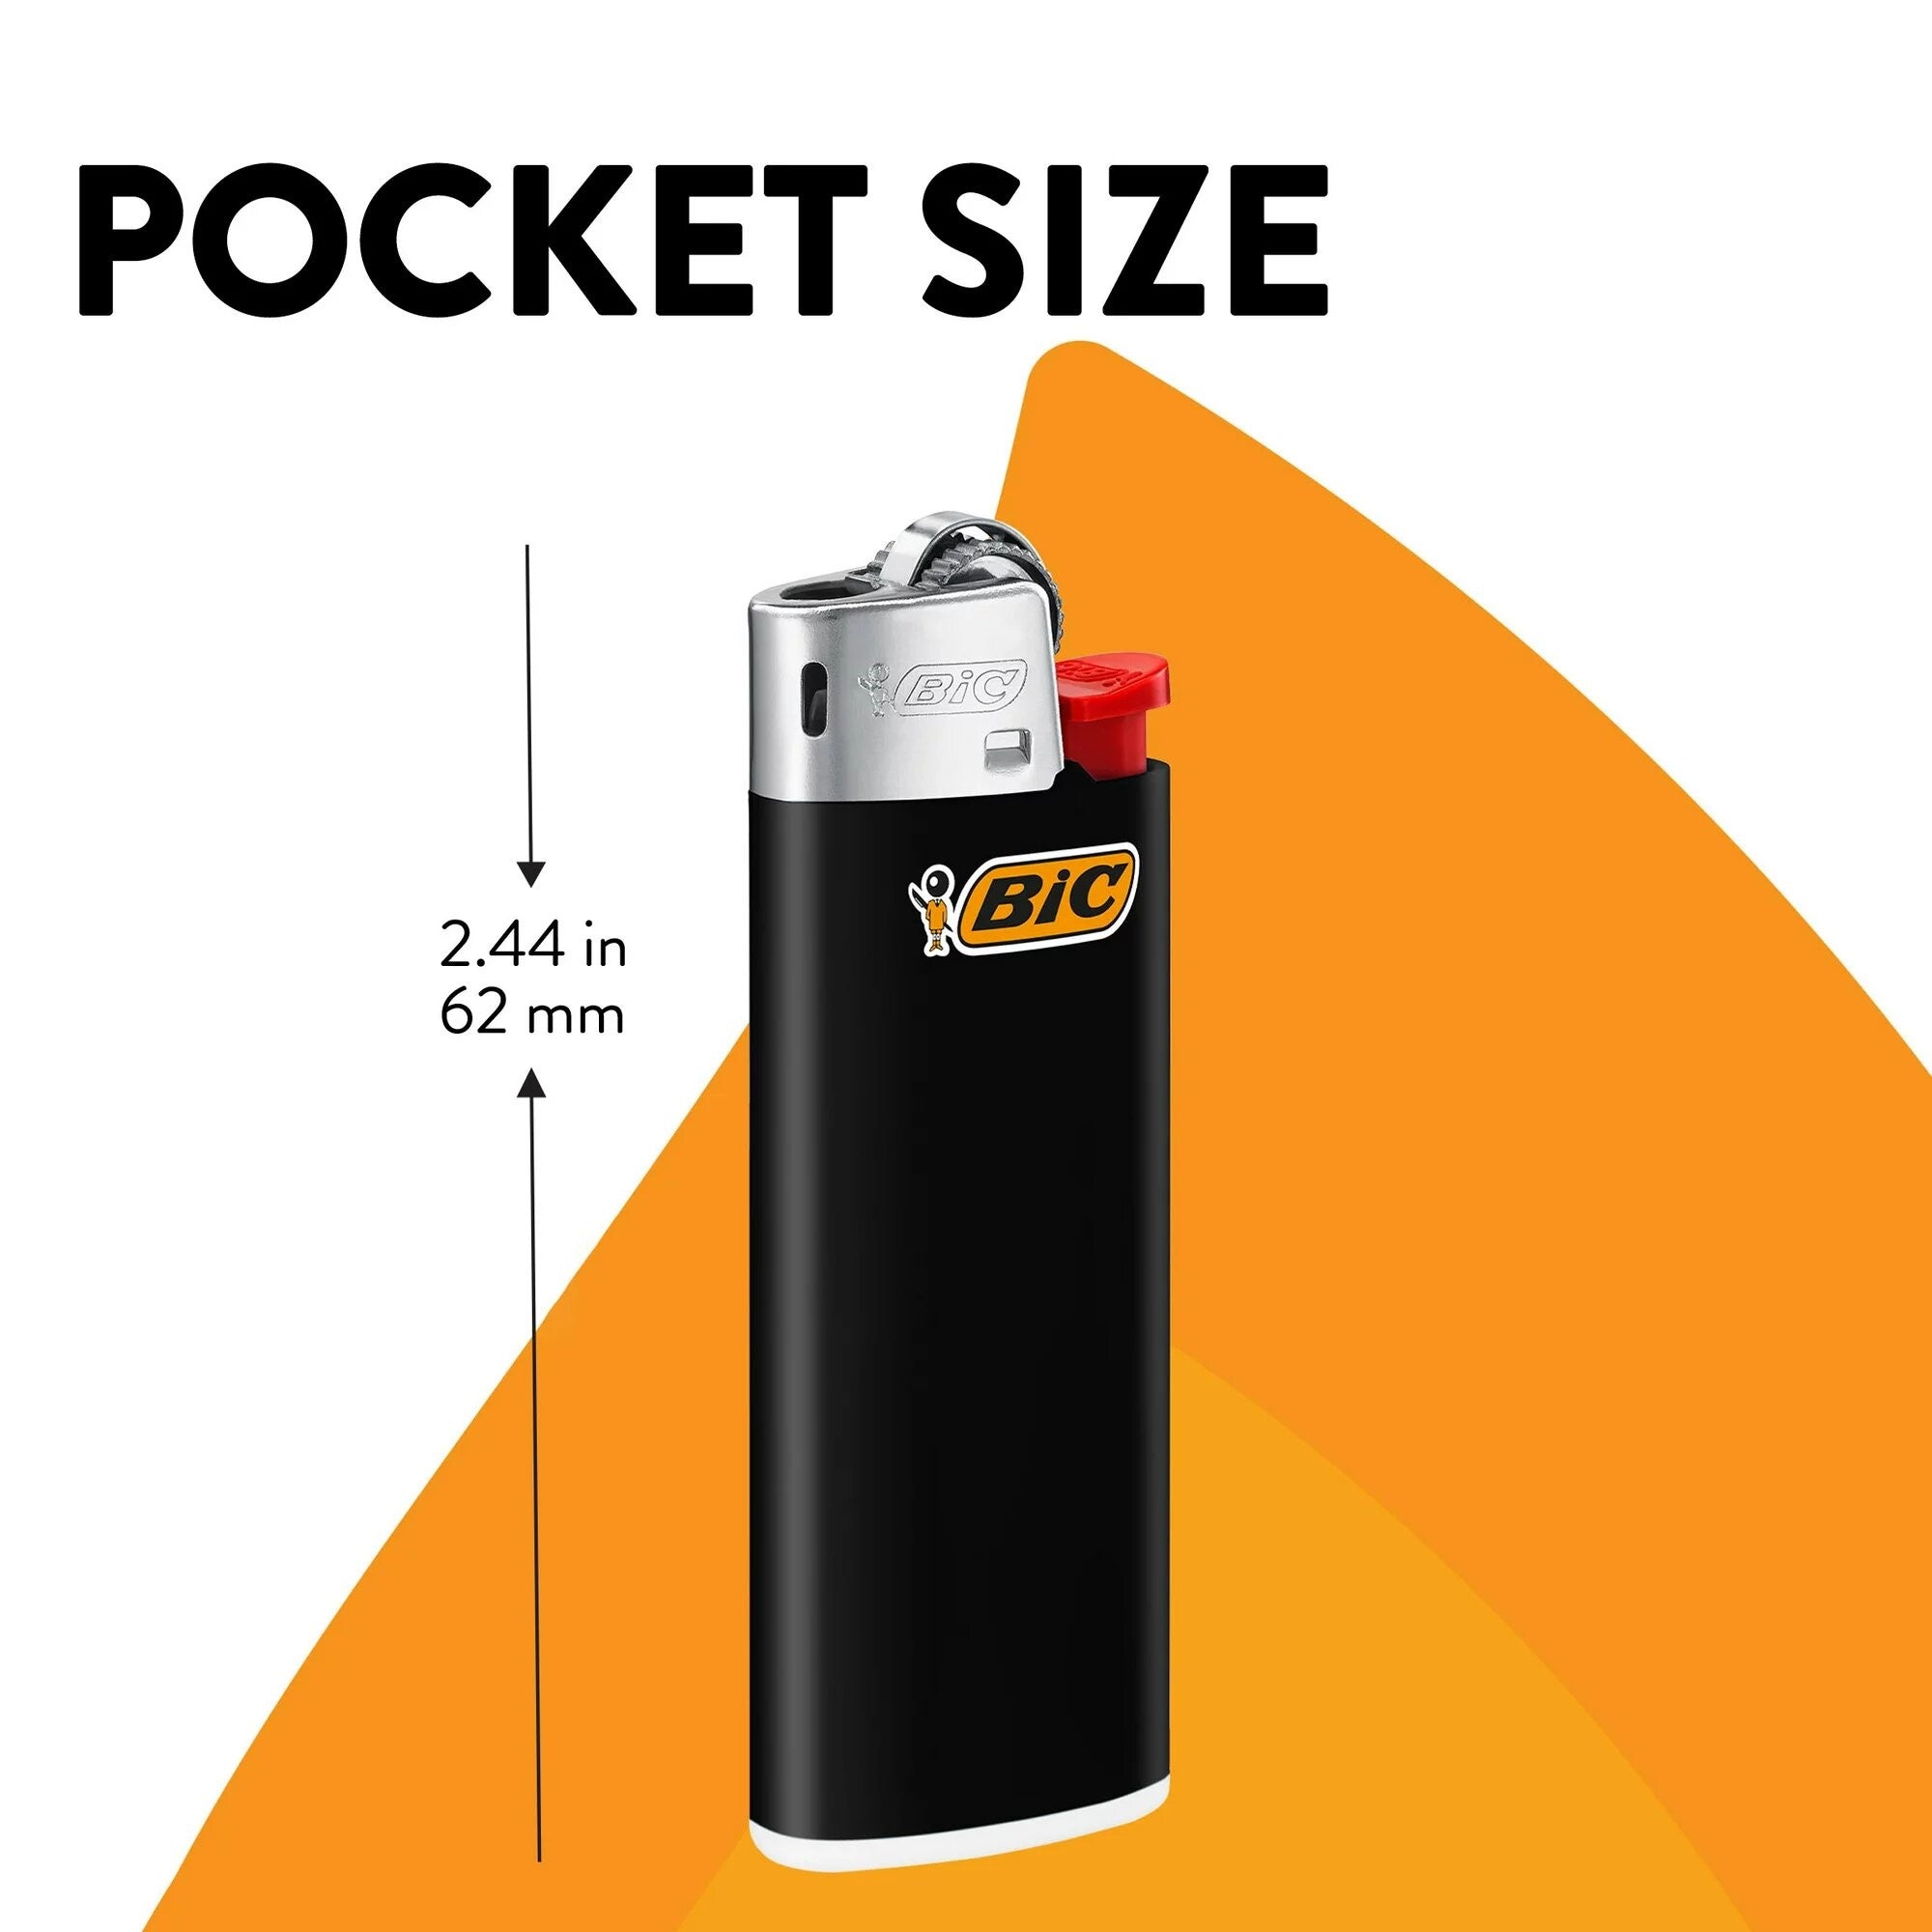 Uniquely shaped to perfectly fit one's hands, BiC Lighters